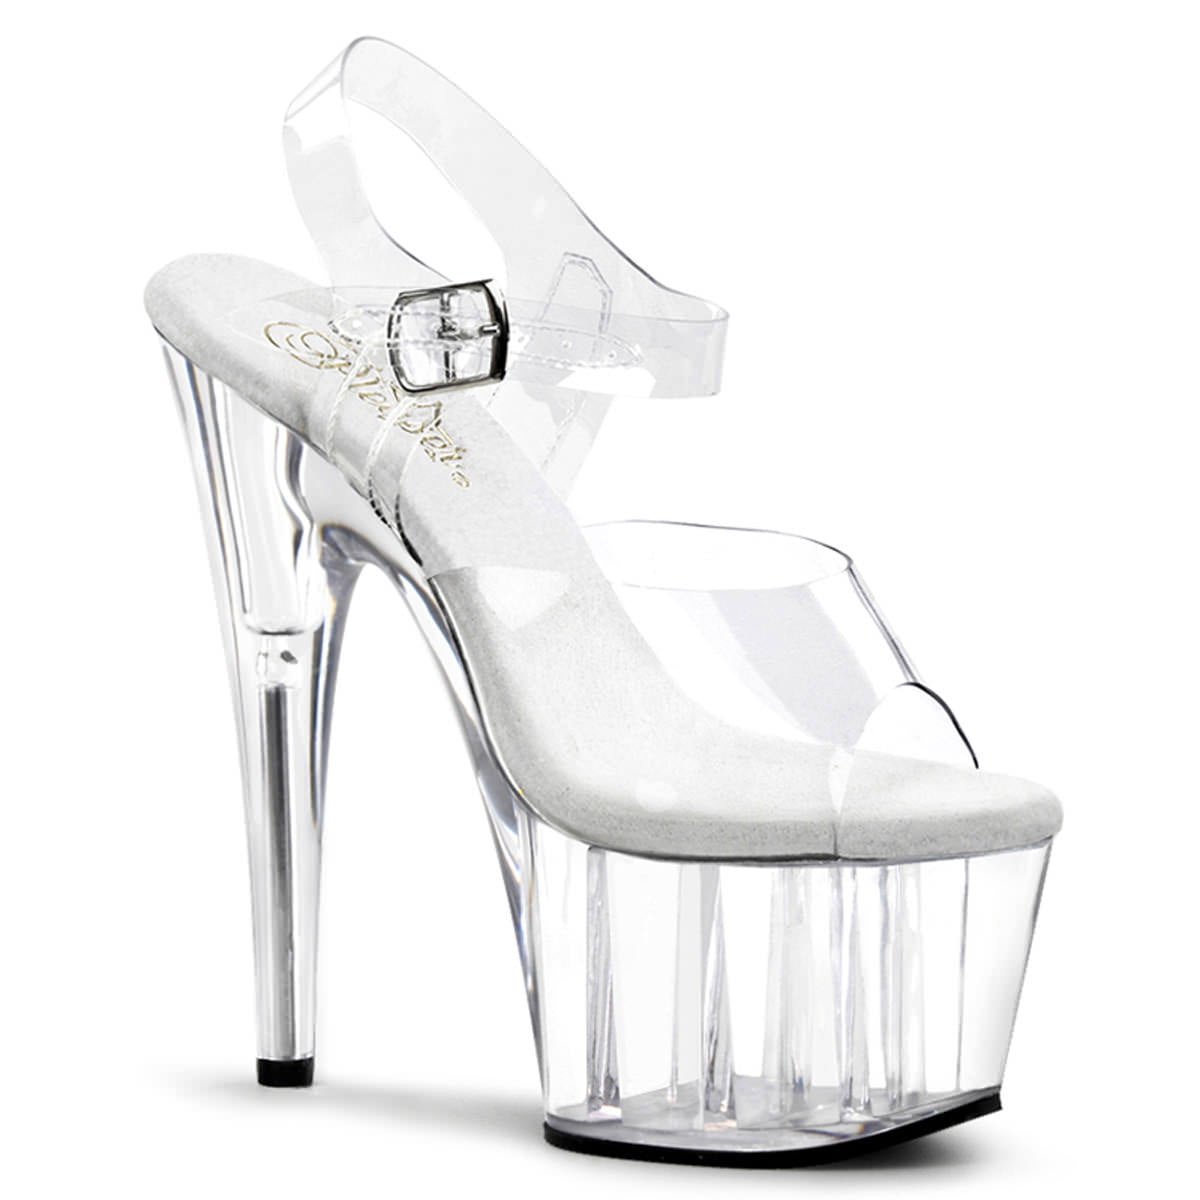 7 Inch Heel ADORE-708 Clear